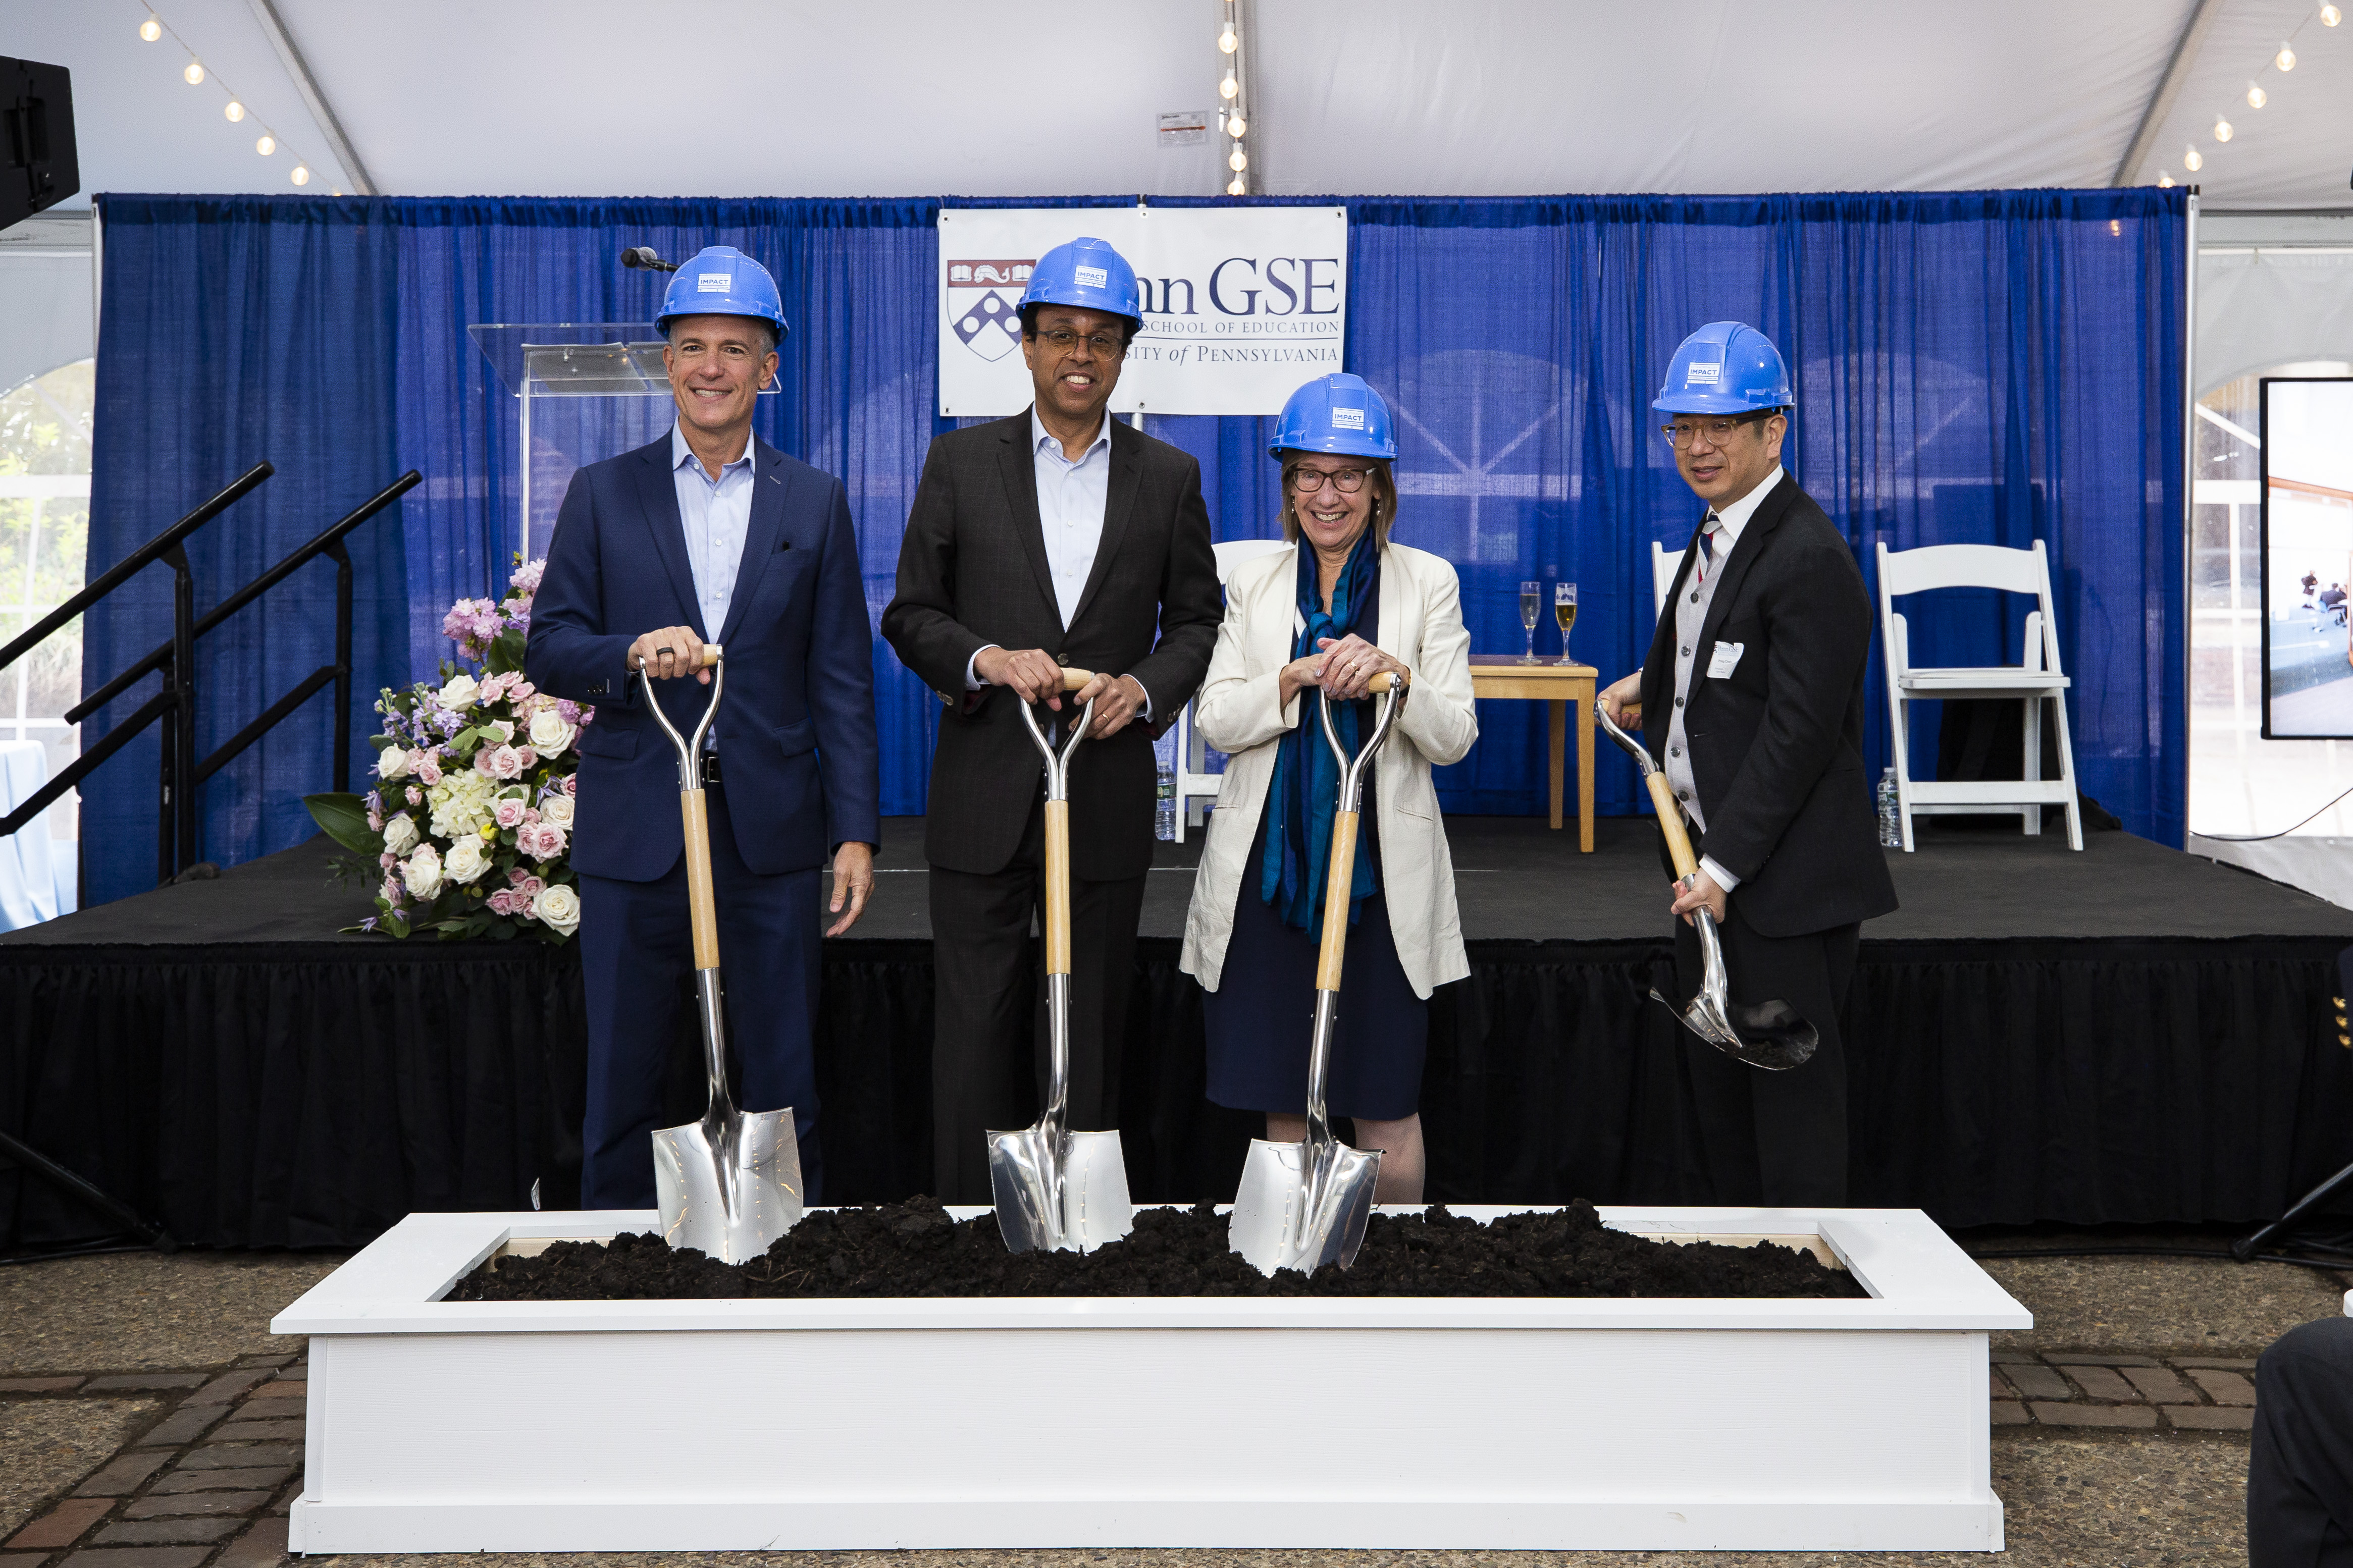 Korn, Pritchett, Grossman and Chen pose with silver shovels at GSE groundbreaking ceremony